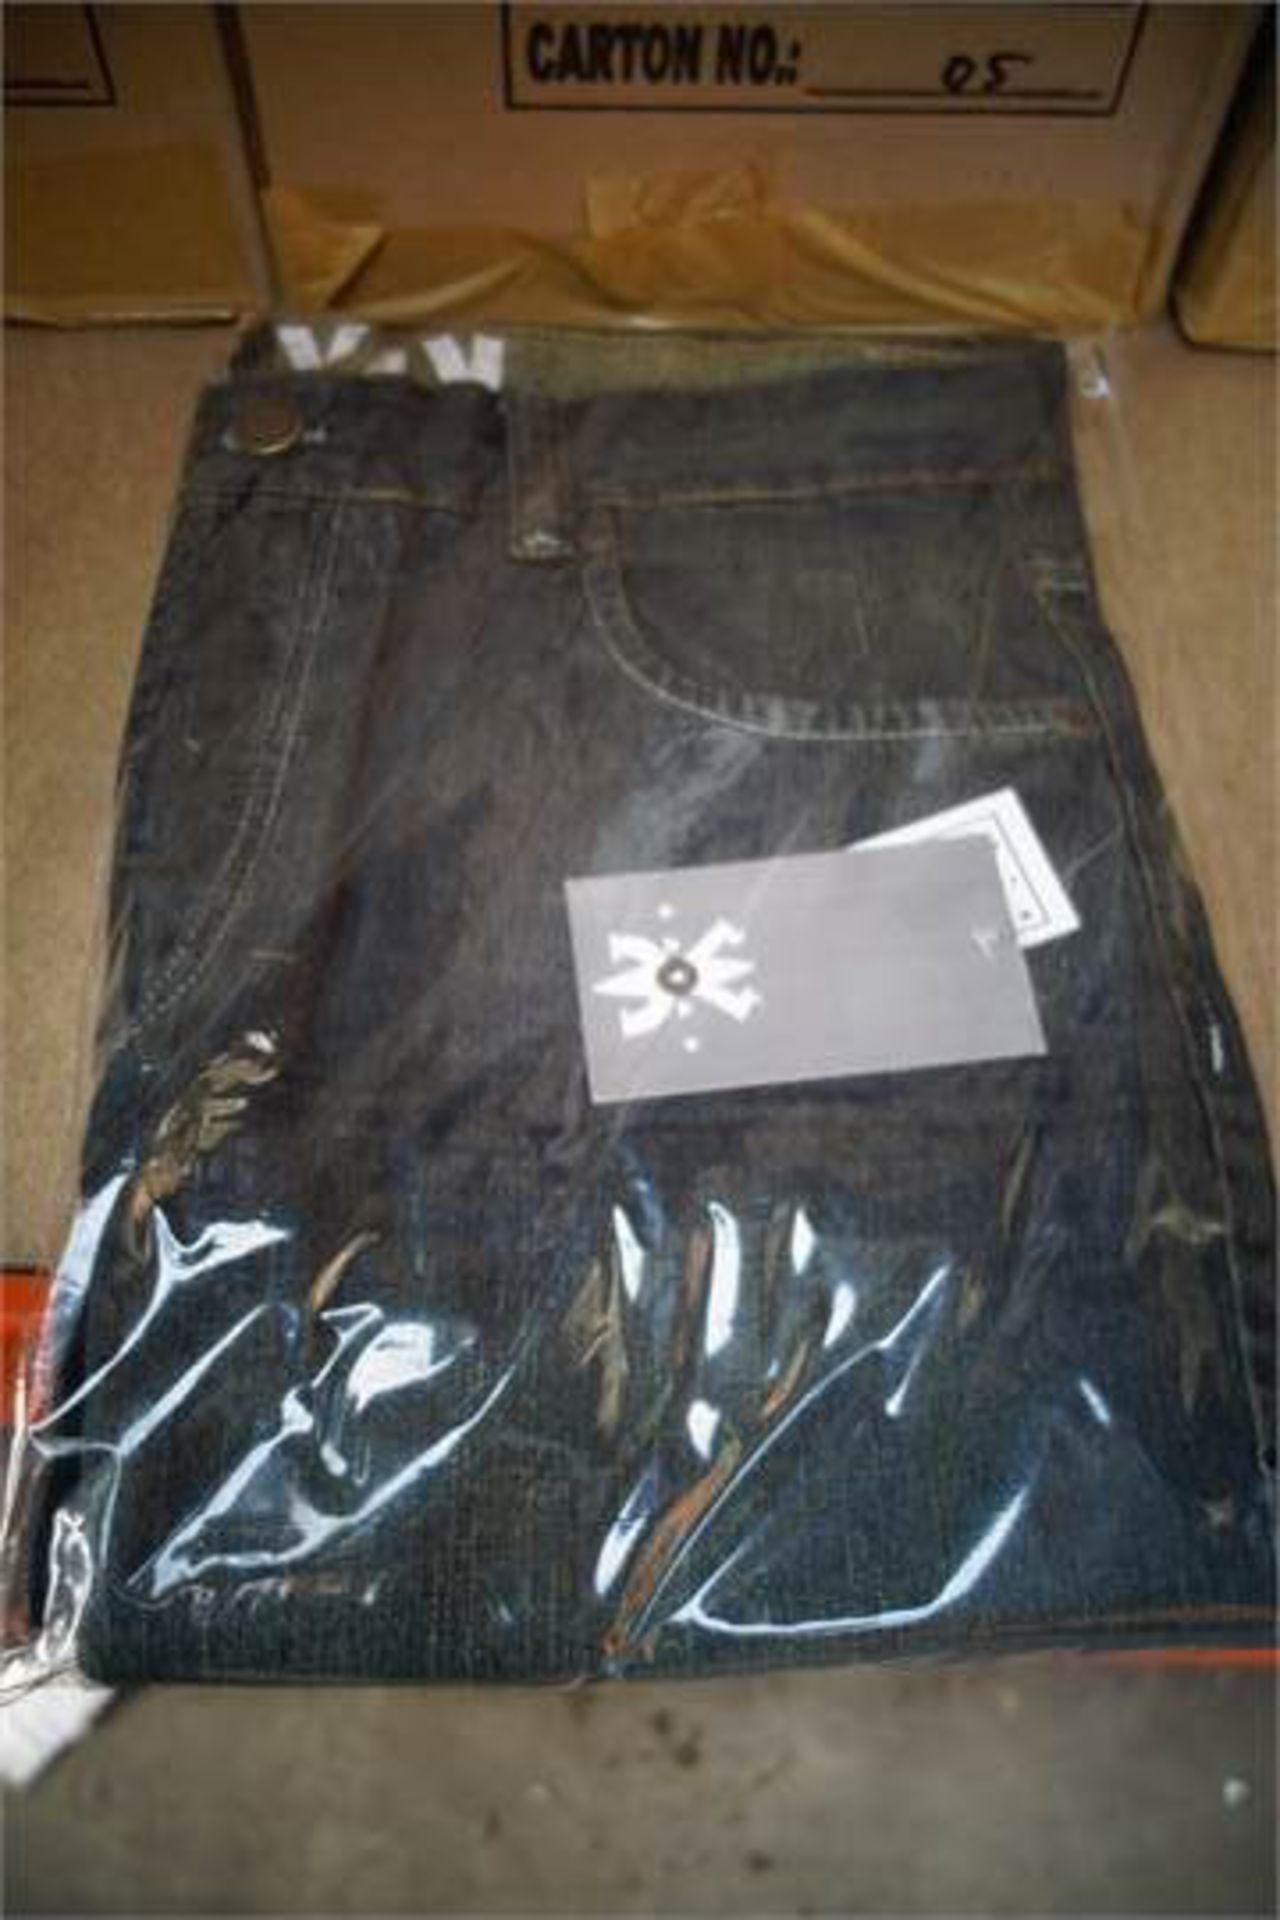 12 x Pairs of Brand New Kayak Denim Jeans. High Quality. Original RRP £40 each, giving this lot a - Image 3 of 4